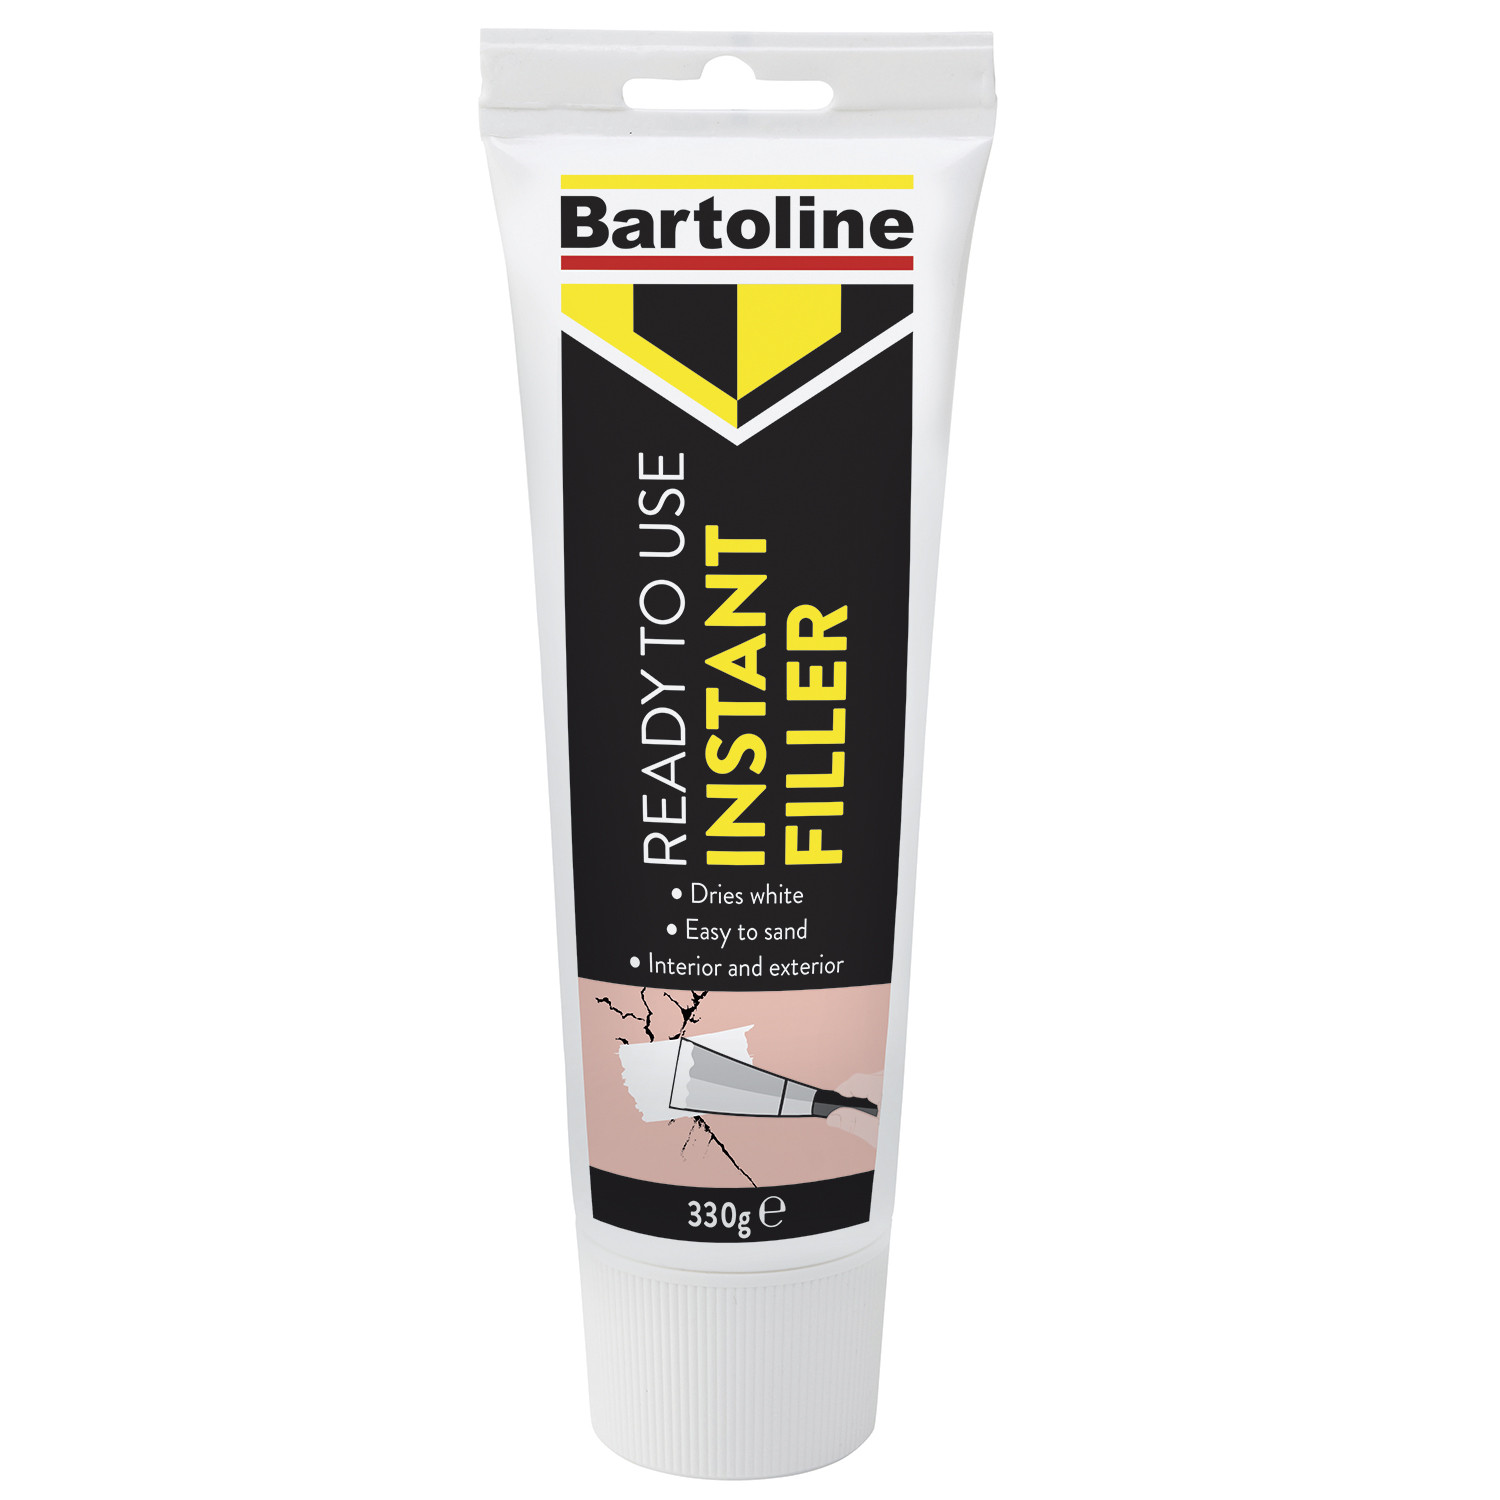 Bartoline Instant Ready Mixed Filler Image